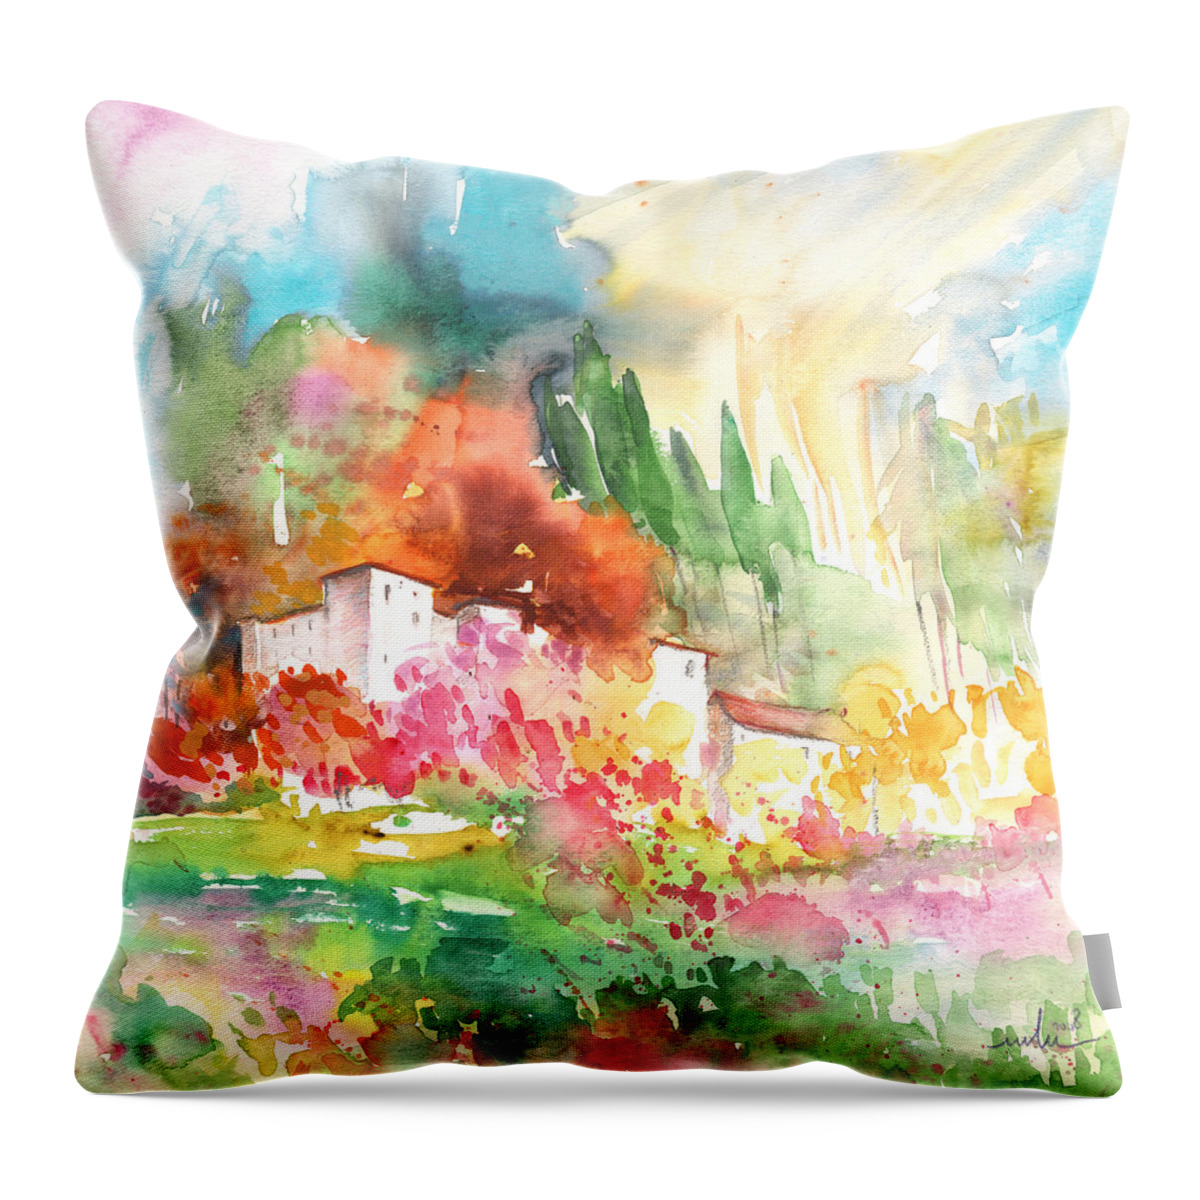 Travel Throw Pillow featuring the painting Andalusian Village by Miki De Goodaboom